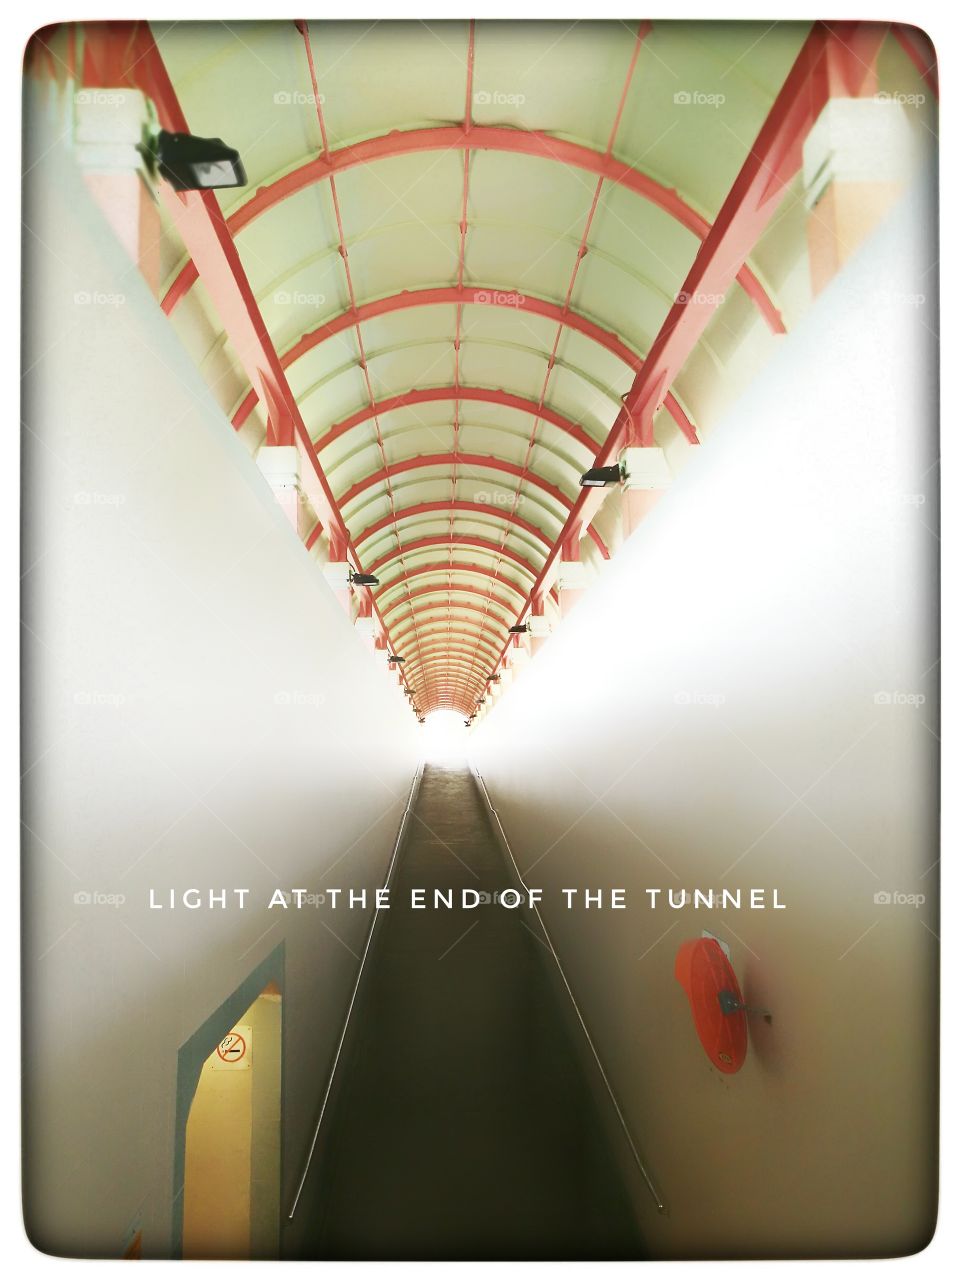 Always a bright light at the brightest tunnel.